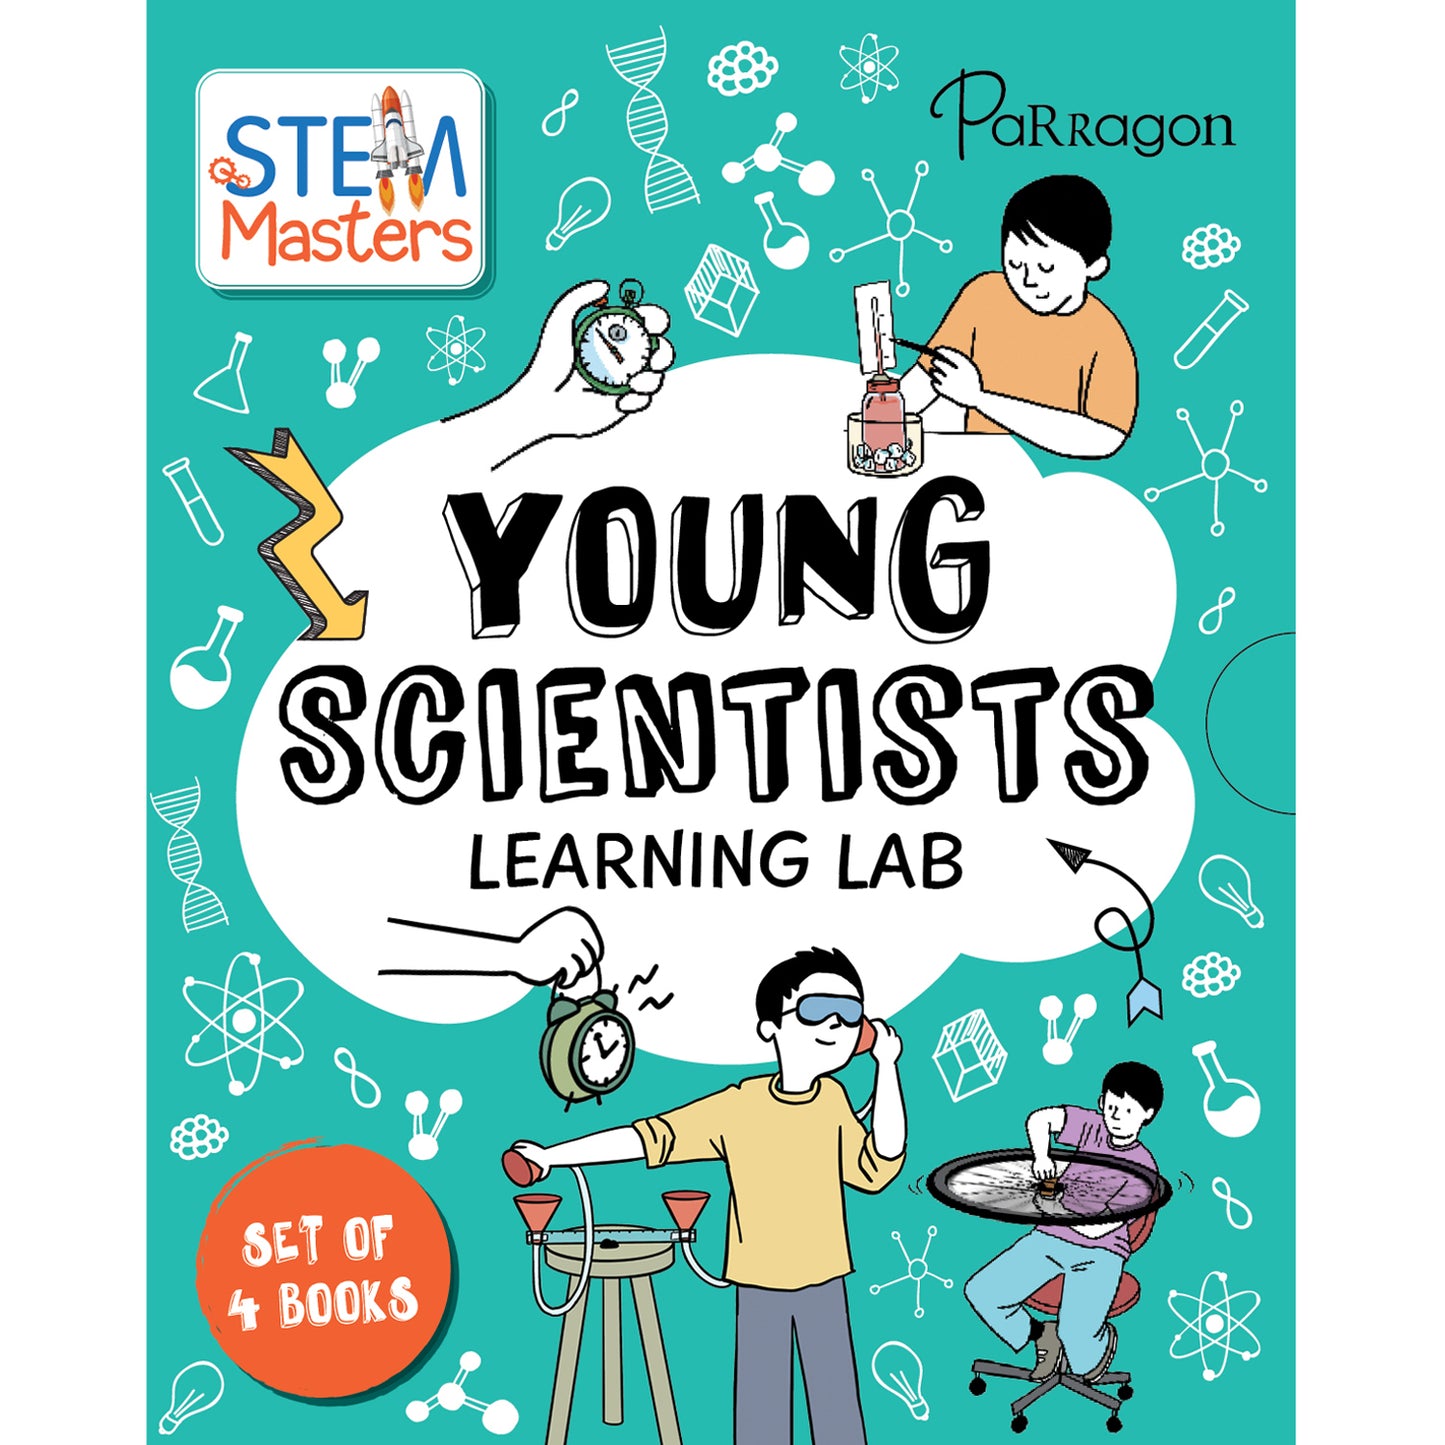 STEM Masters Box Set | Reference books for kids | Science books for children | Elements | Earth | Resources Set of 4 books